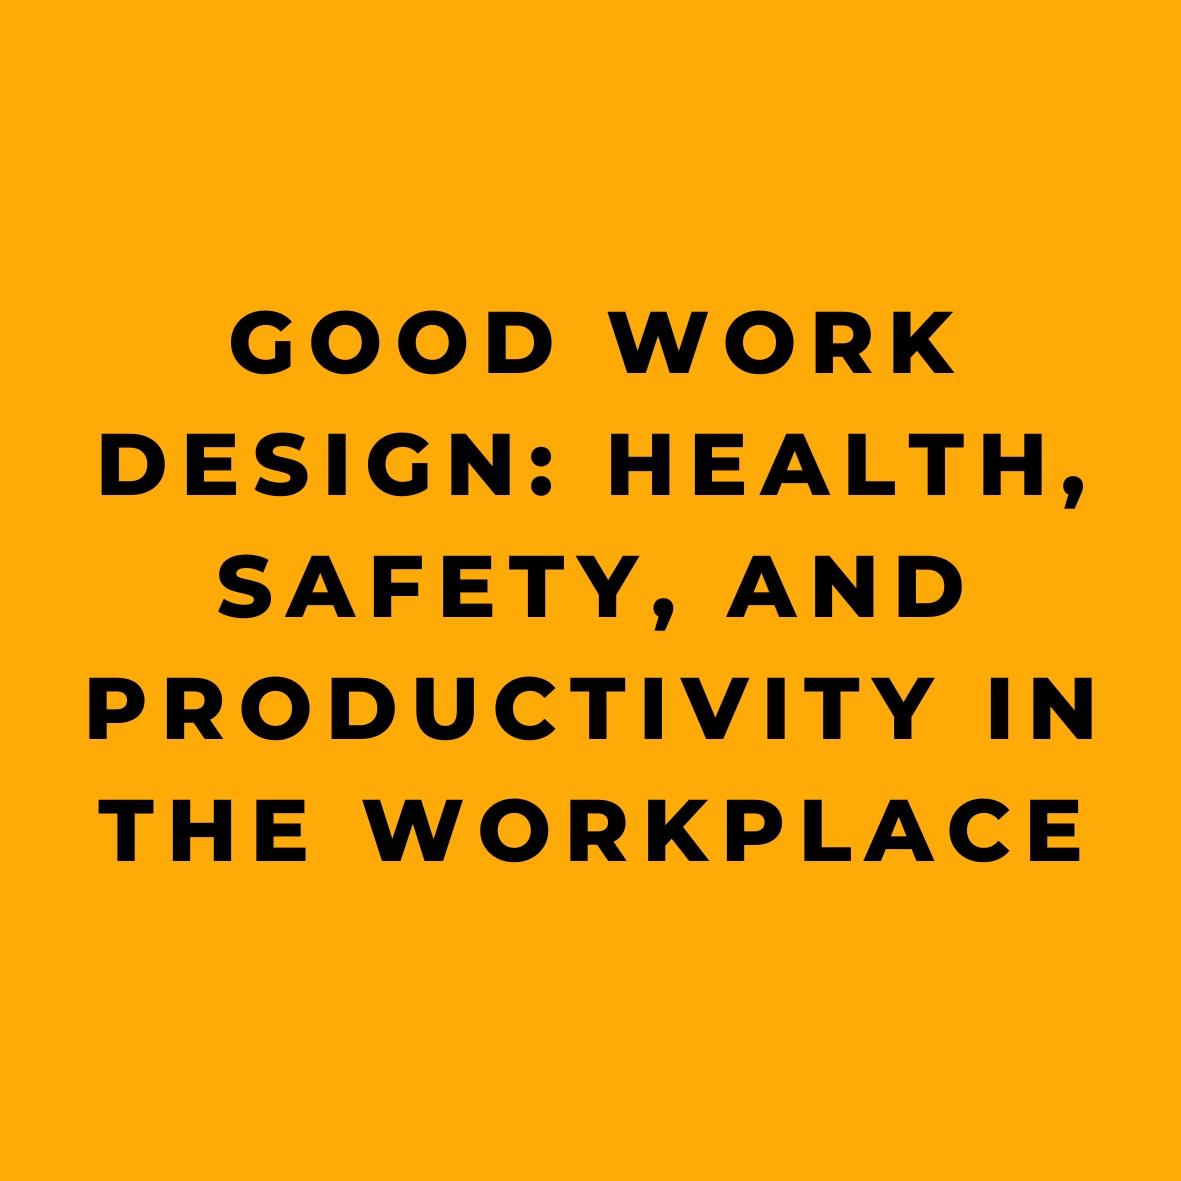 Good Work Design Health, Safety, and Productivity in the Workplace